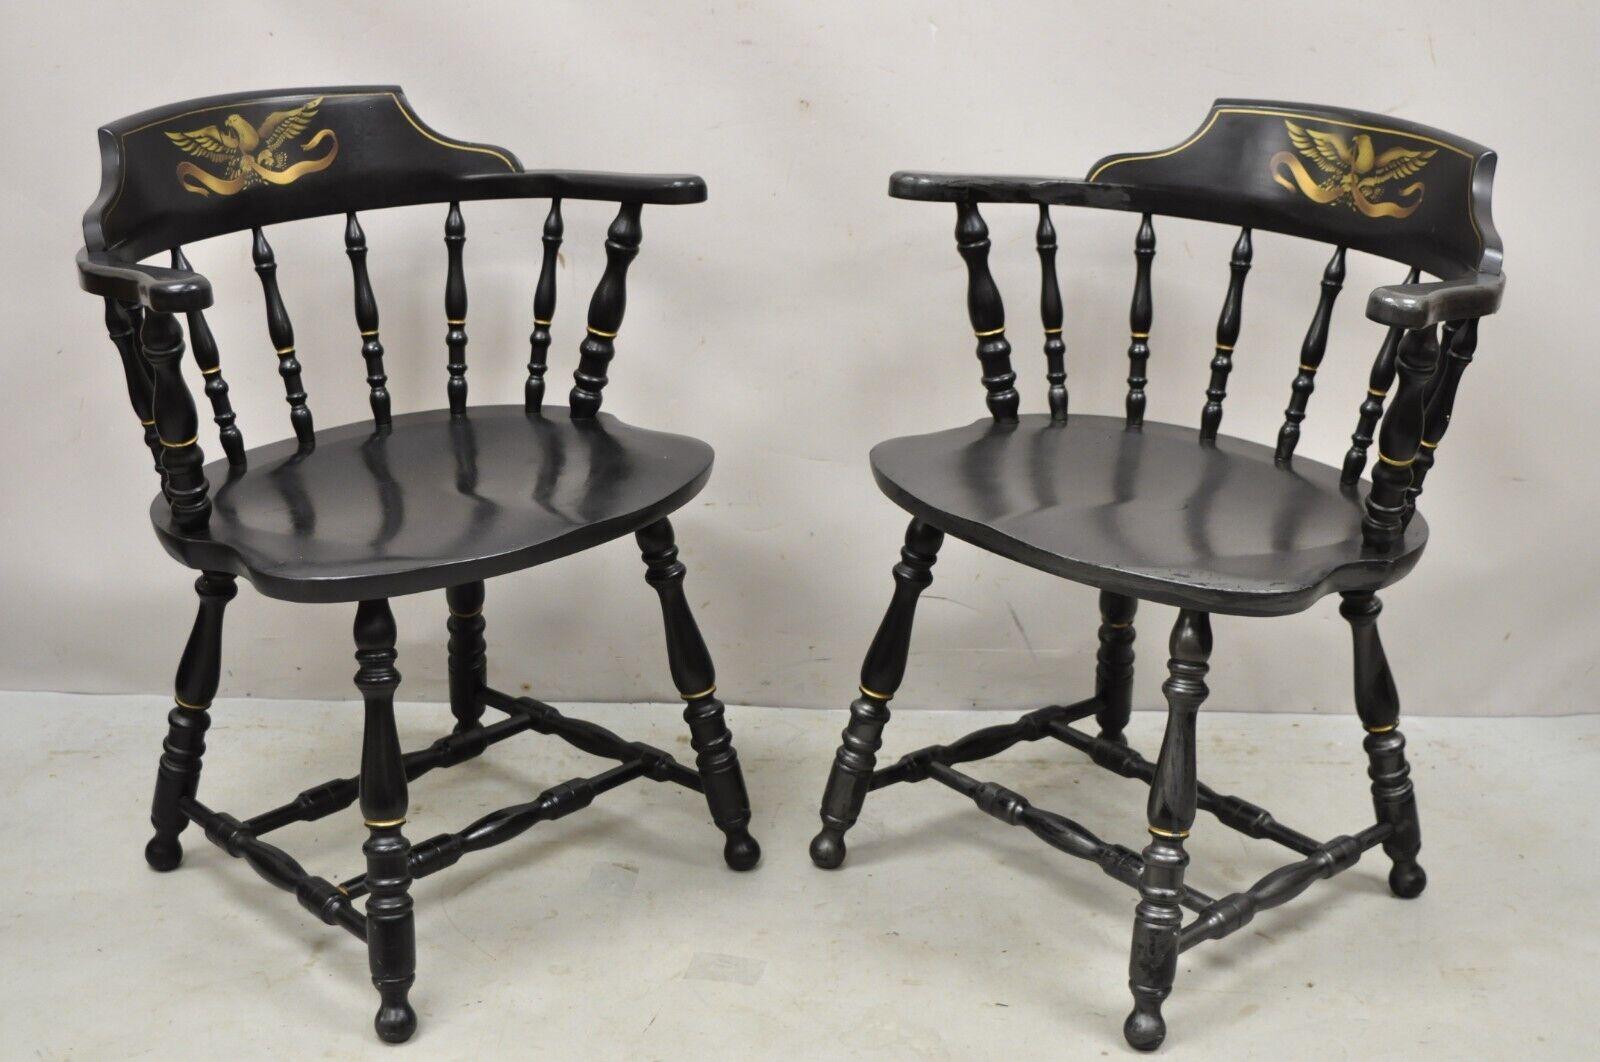 Vintage S. Bent & Bros black painted eagle colonial pub style chairs - a pair. Item features a gold eagle to backrest, spindle backs, solid wood construction, original label, quality American craftsmanship, great style and form. circa Mid-20th